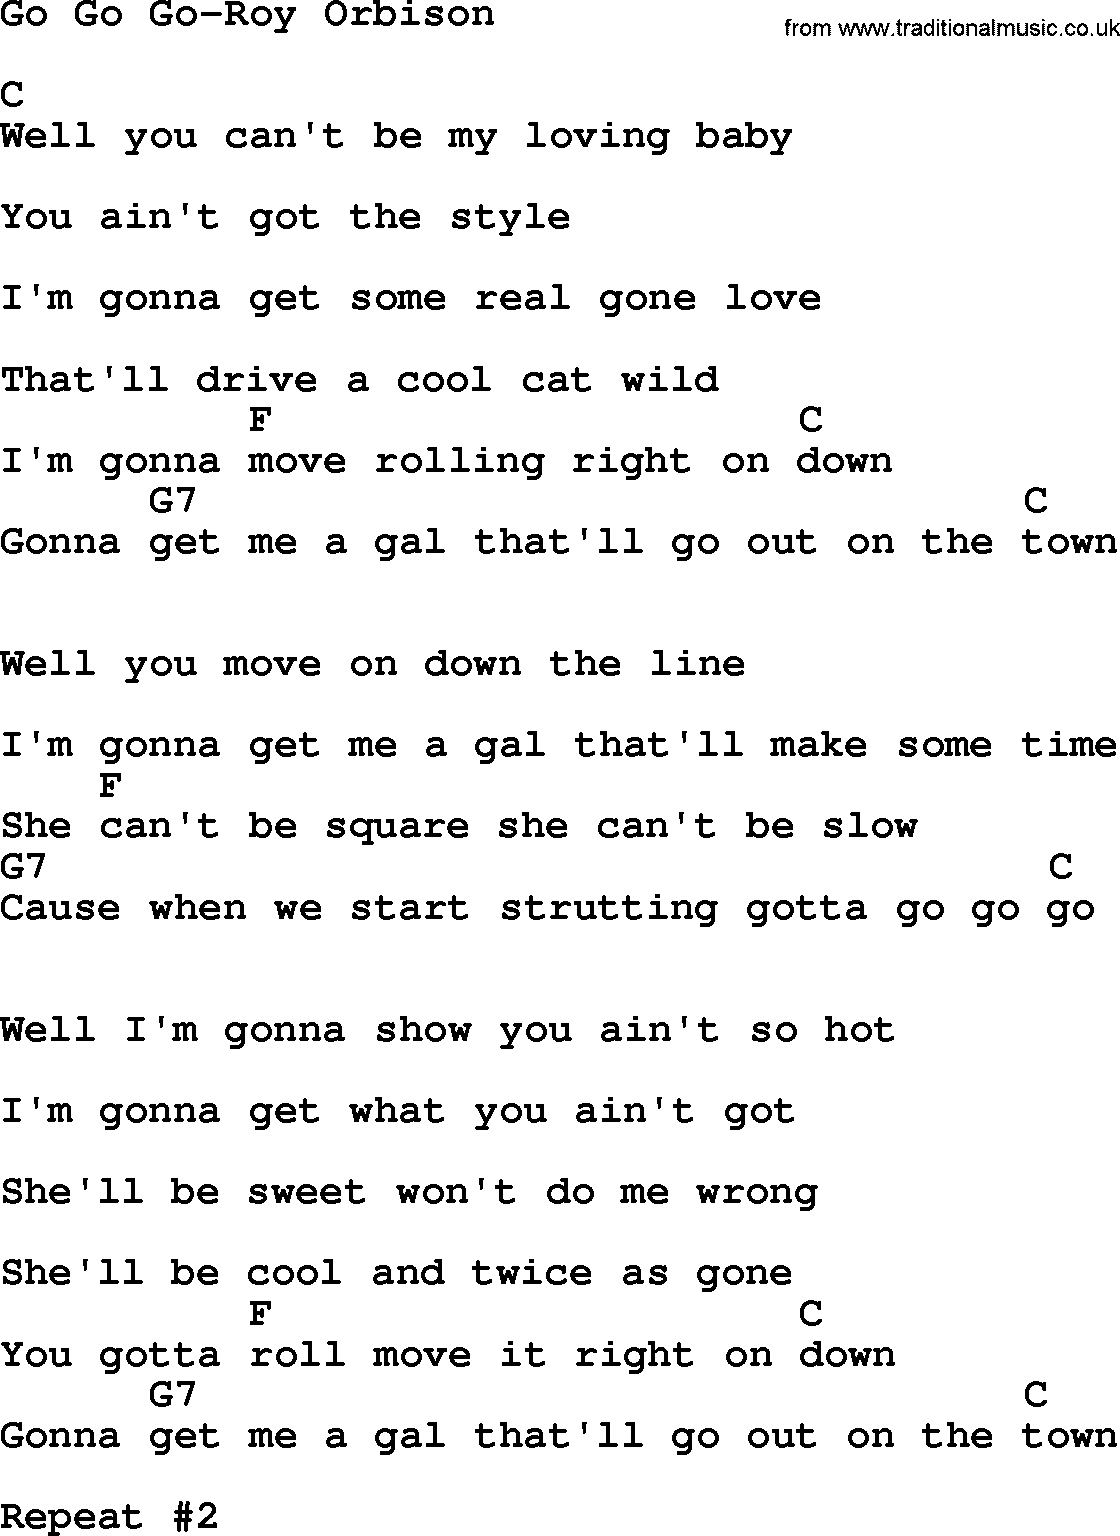 Country music song: Go Go Go-Roy Orbison lyrics and chords